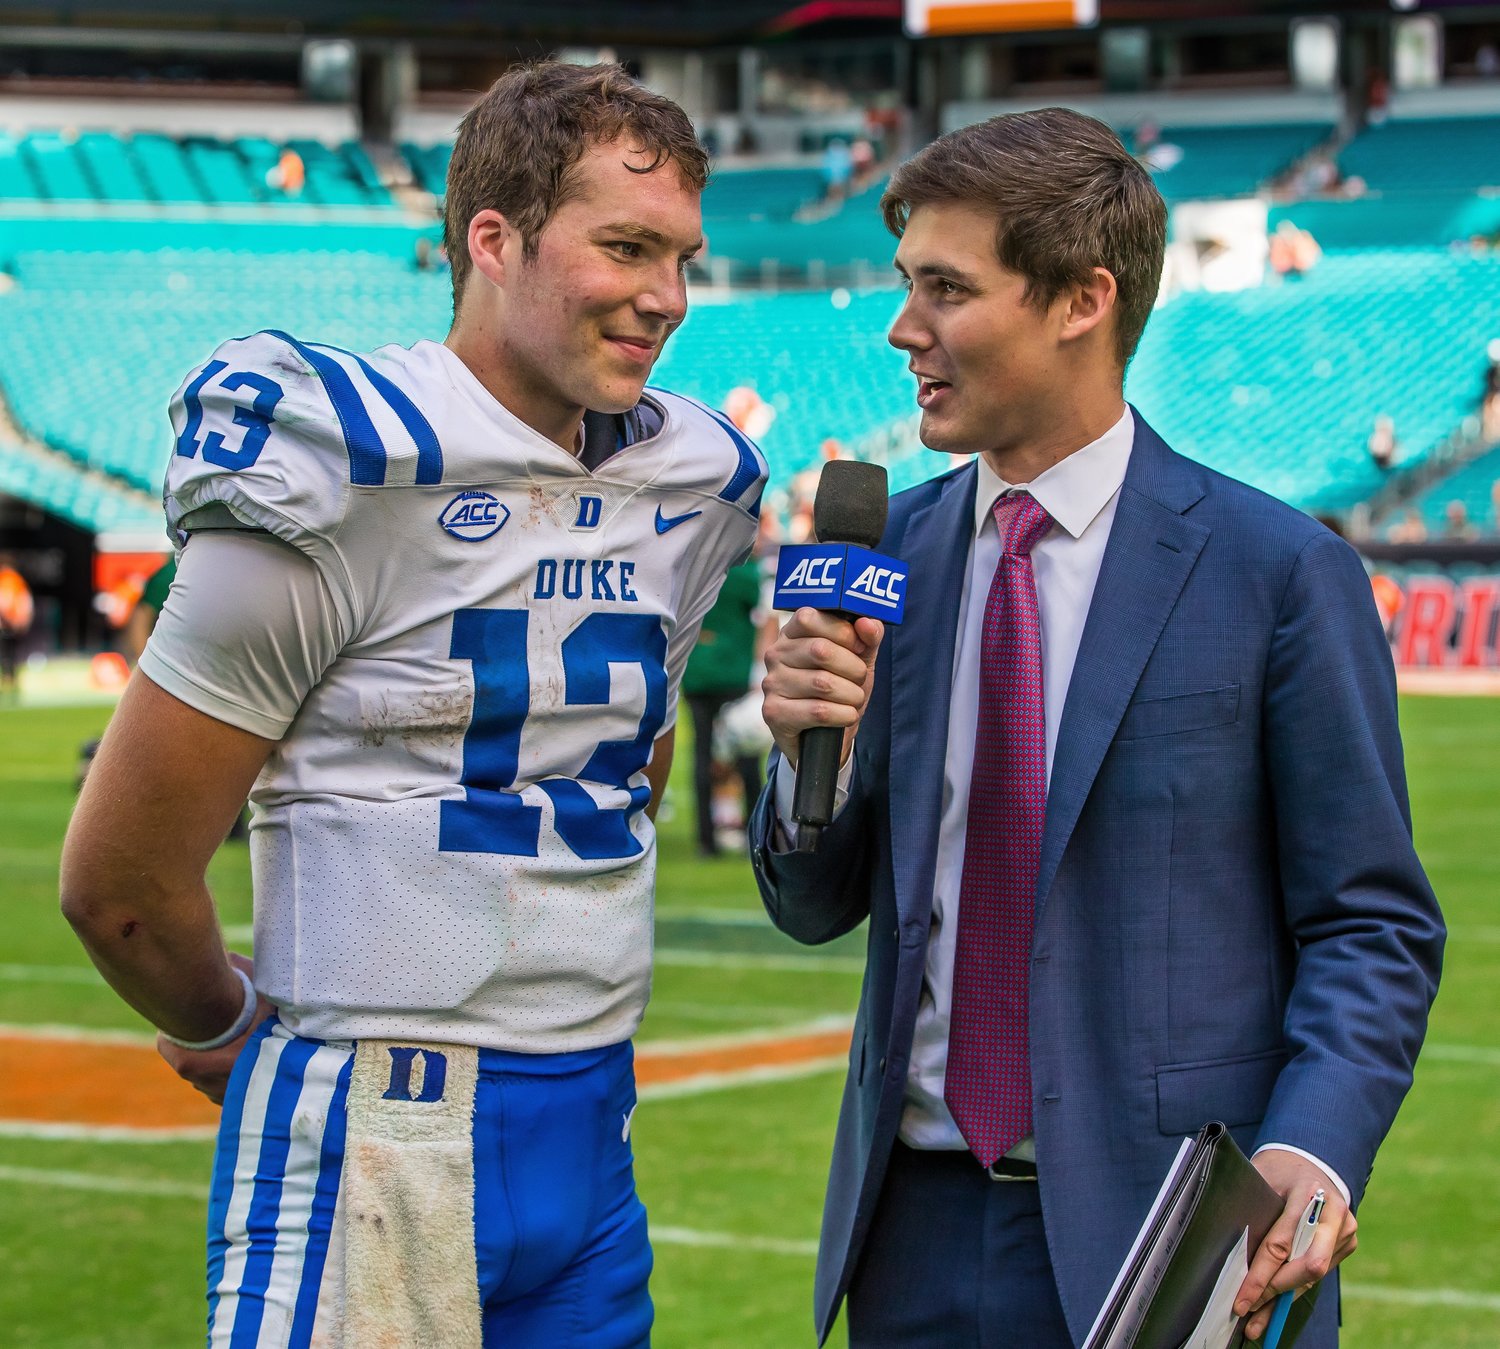 Duke starting quarterback and member of Fairhope High School’s Class of 2021 Riley Leonard is interviewed by the ACC Network’s Wiley Ballard after the Blue Devils’ 45-21 win over the Miami Hurricanes at Hard Rock Stadium Saturday, Oct. 22. Leonard ran for three touchdowns and threw for another to get Duke one win away from postseason play. Watch the full interview on Gulf Coast Media Sports' social media channels @GCMSportsAL.